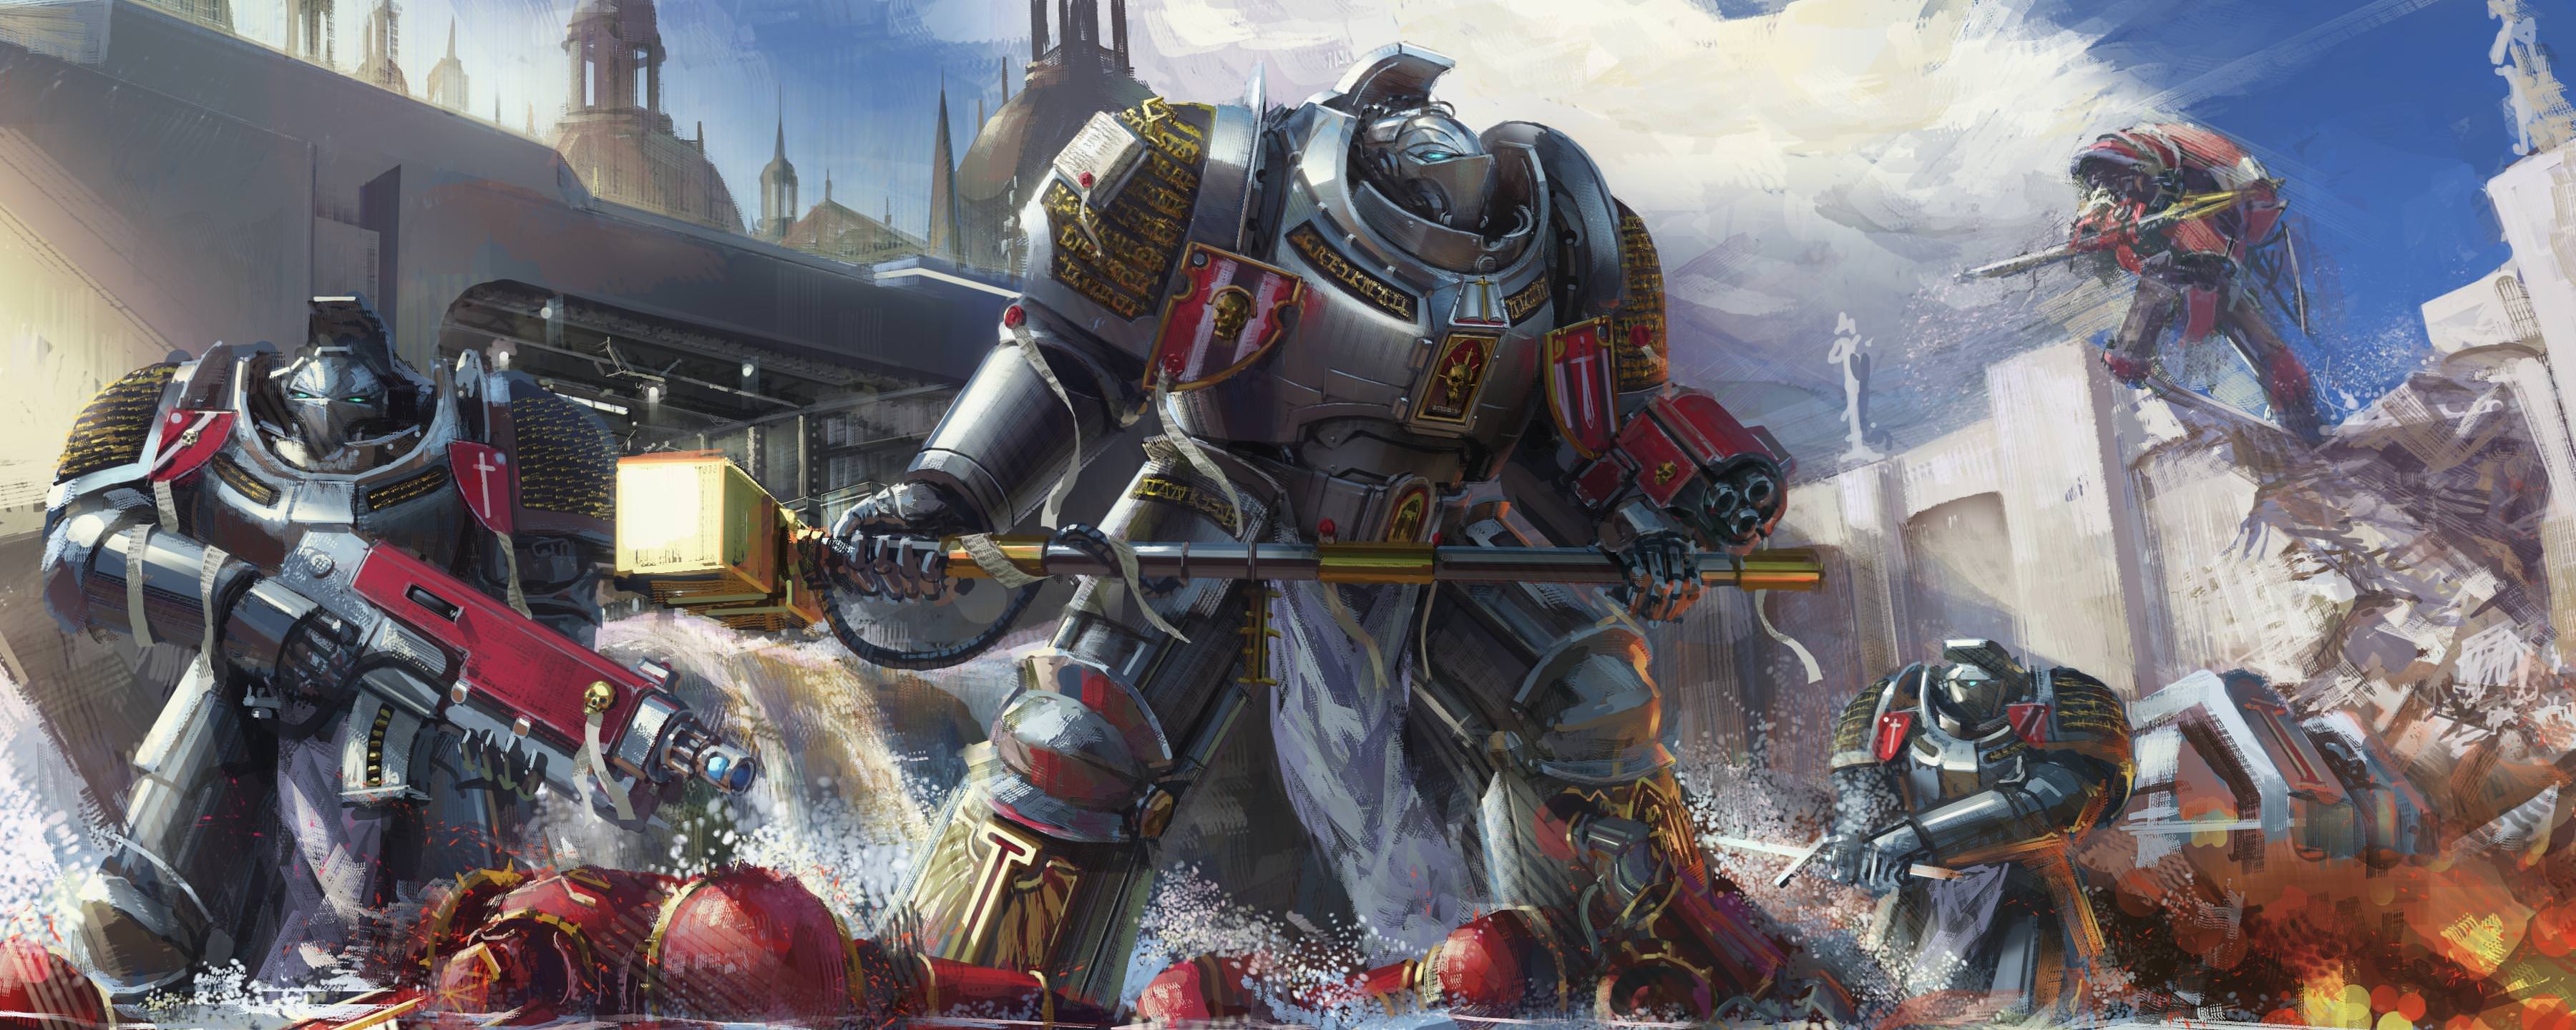 1080P Warhammer 40K Wallpapers - Looking for the best wh40k wallpaper ...